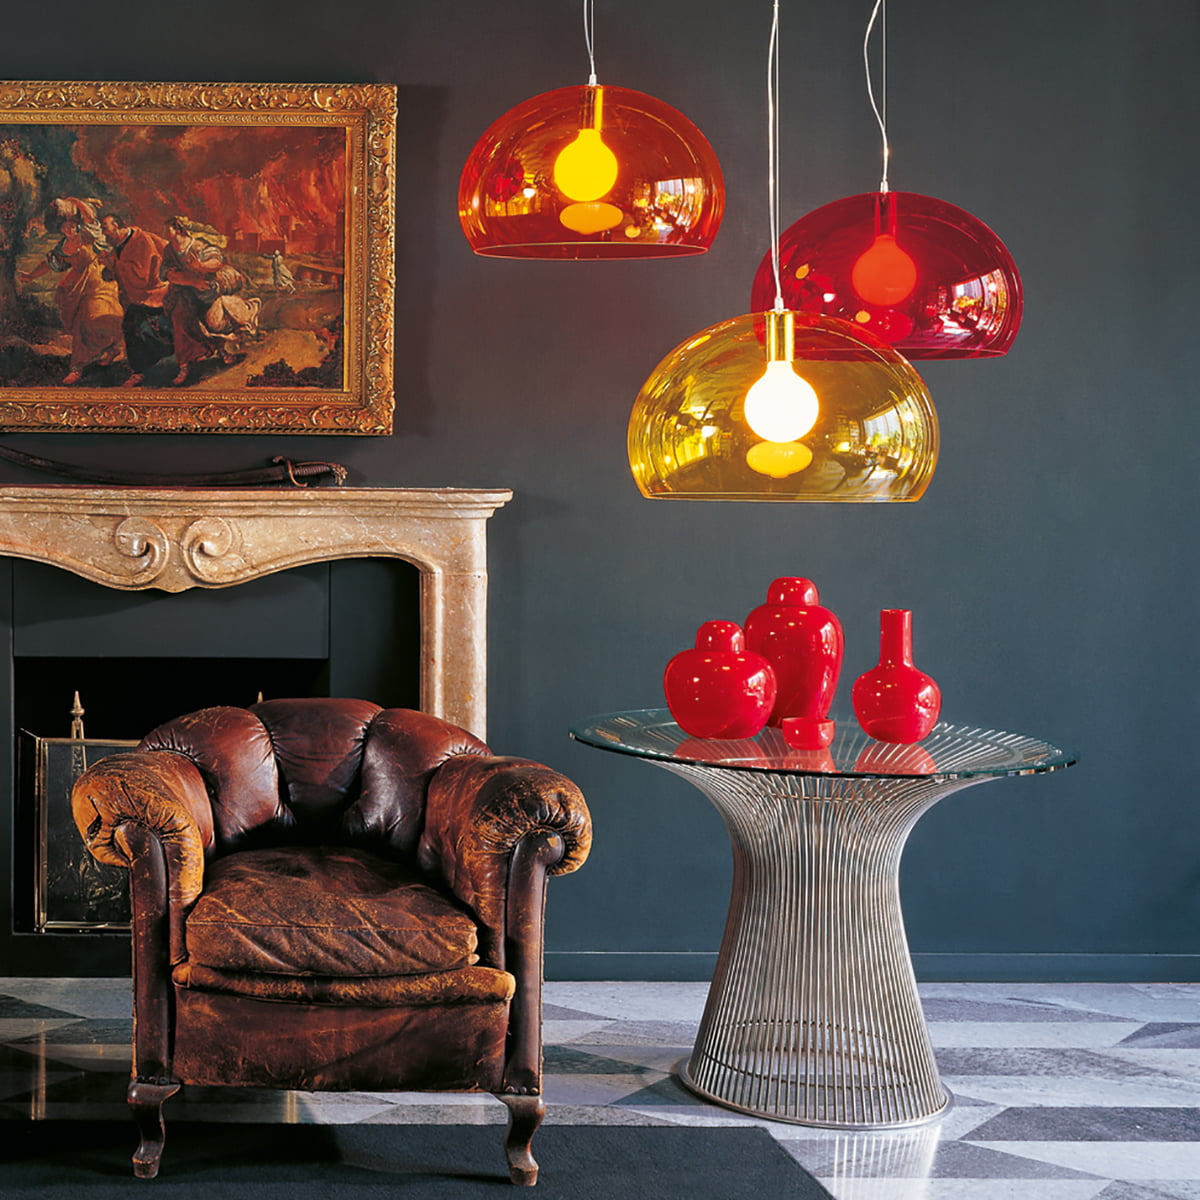 Small FL/Y pendant lamp by Kartell in our shop